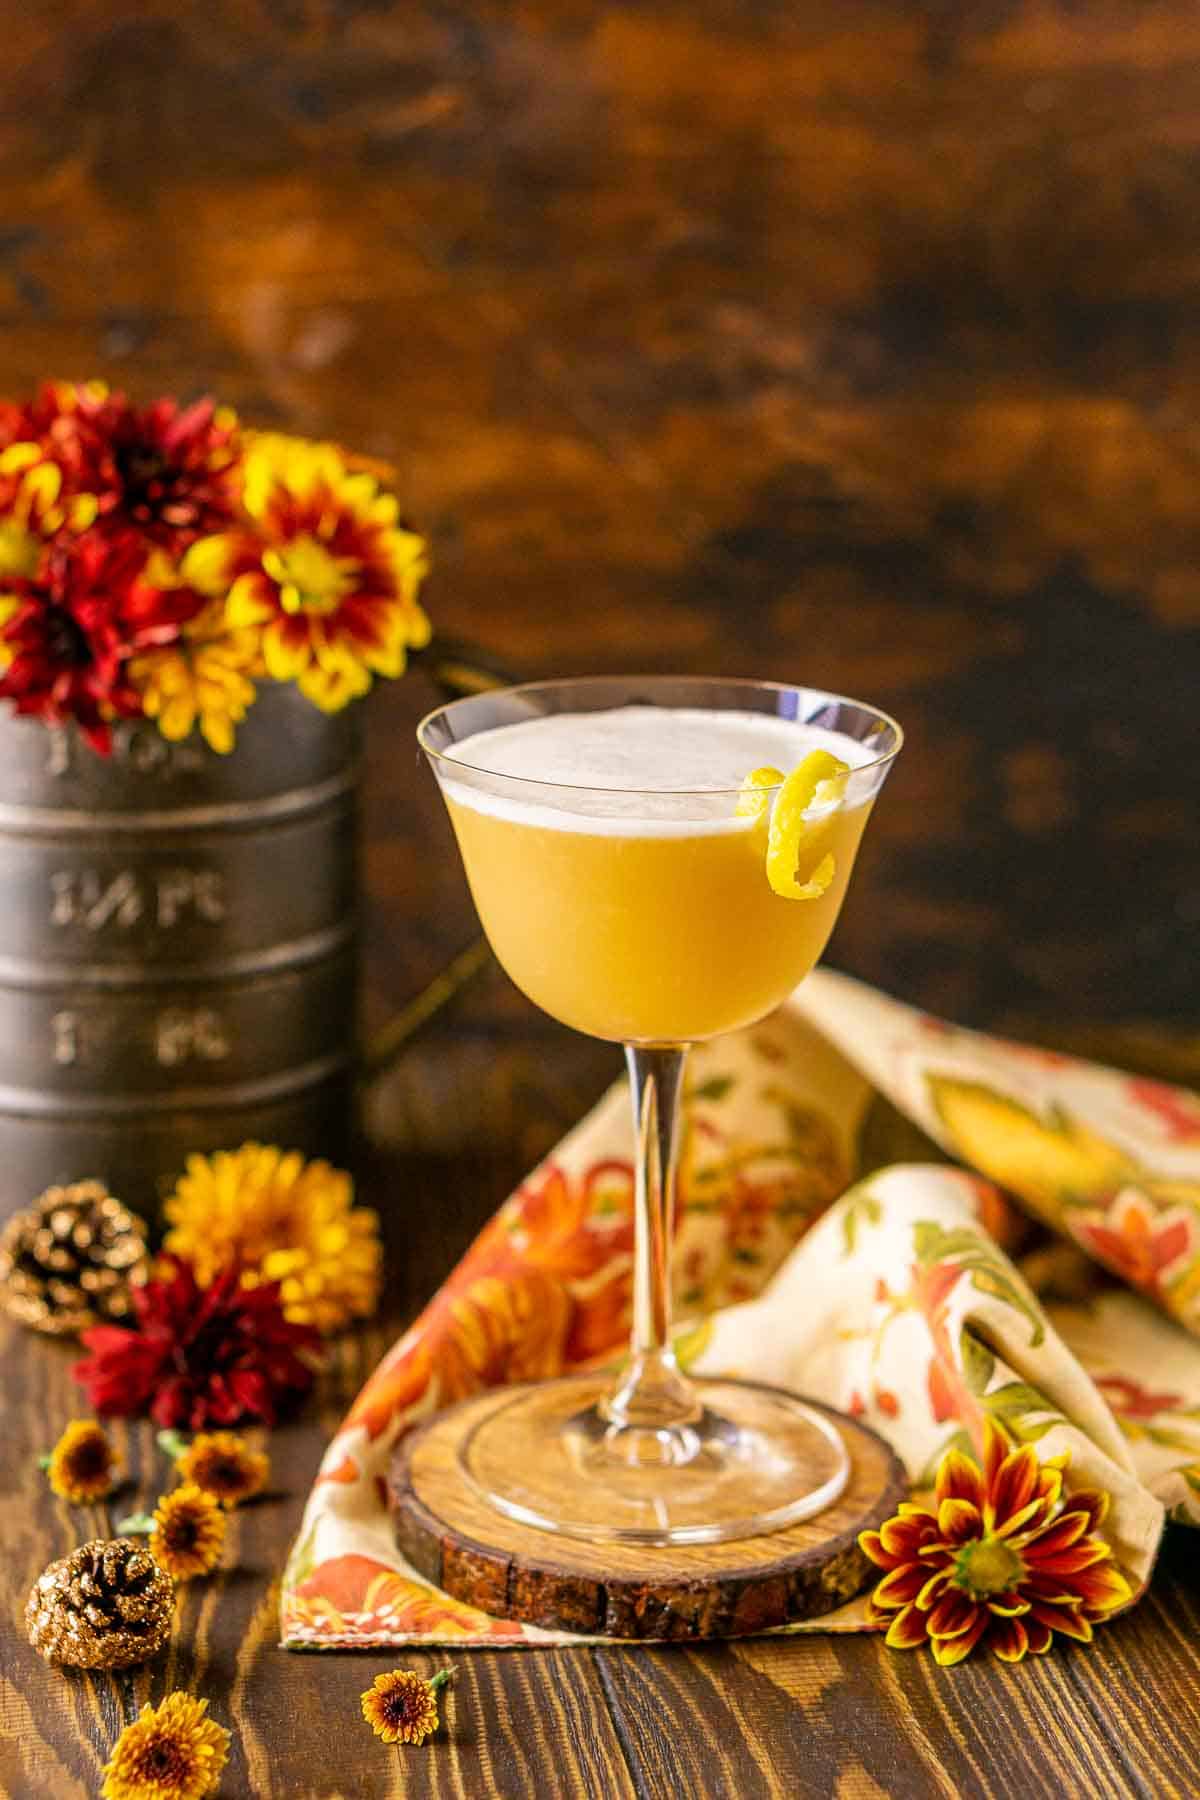 A maple whiskey sour on a wooden coaster with fall-colored flowers and glittery pinecones around it.